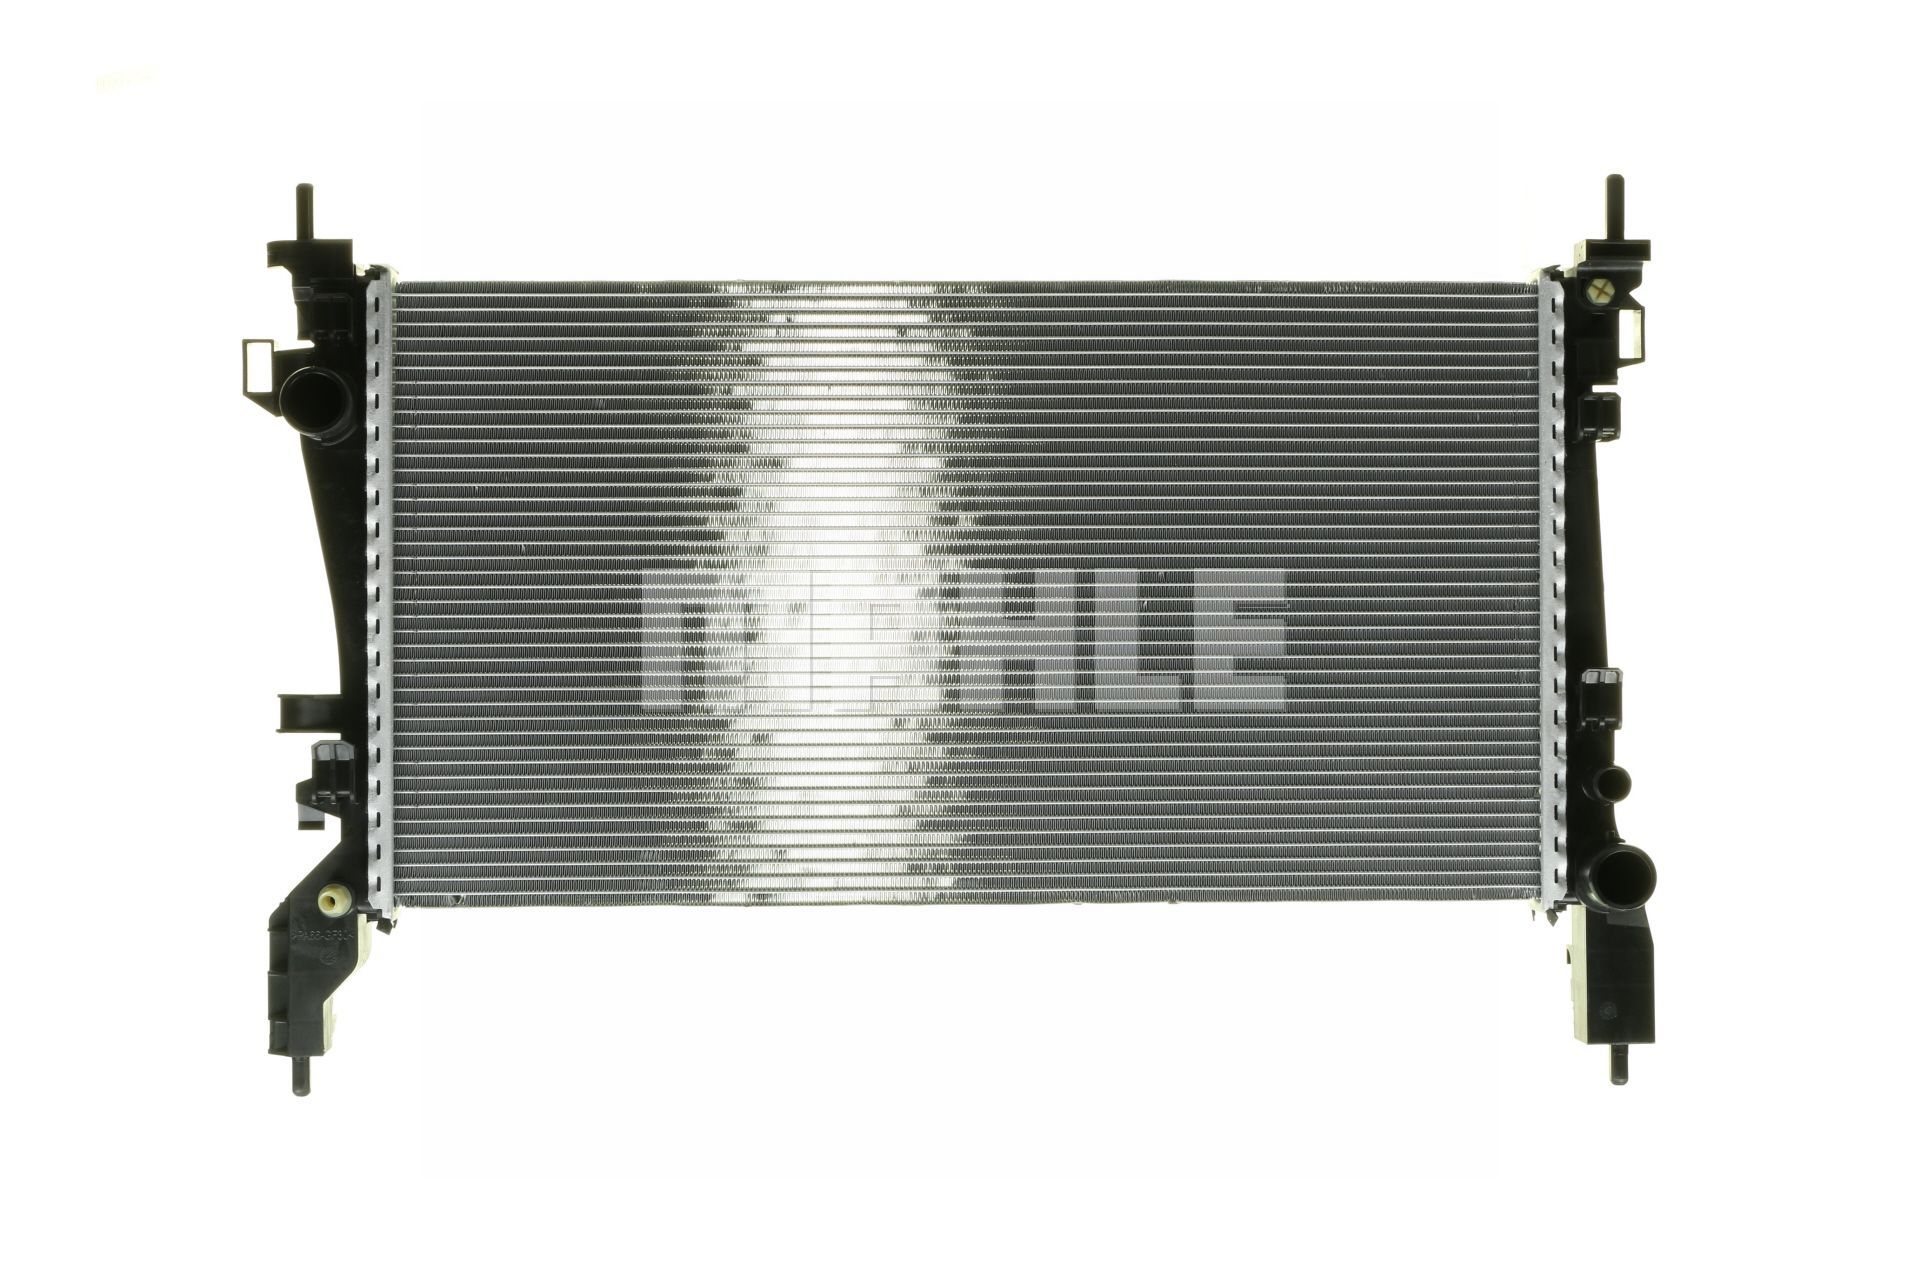 376754561 MAHLE ORIGINAL for vehicles with air conditioning, 630 x 342 x 26 mm, Manual Transmission, Brazed cooling fins Radiator CR 1120 000P buy